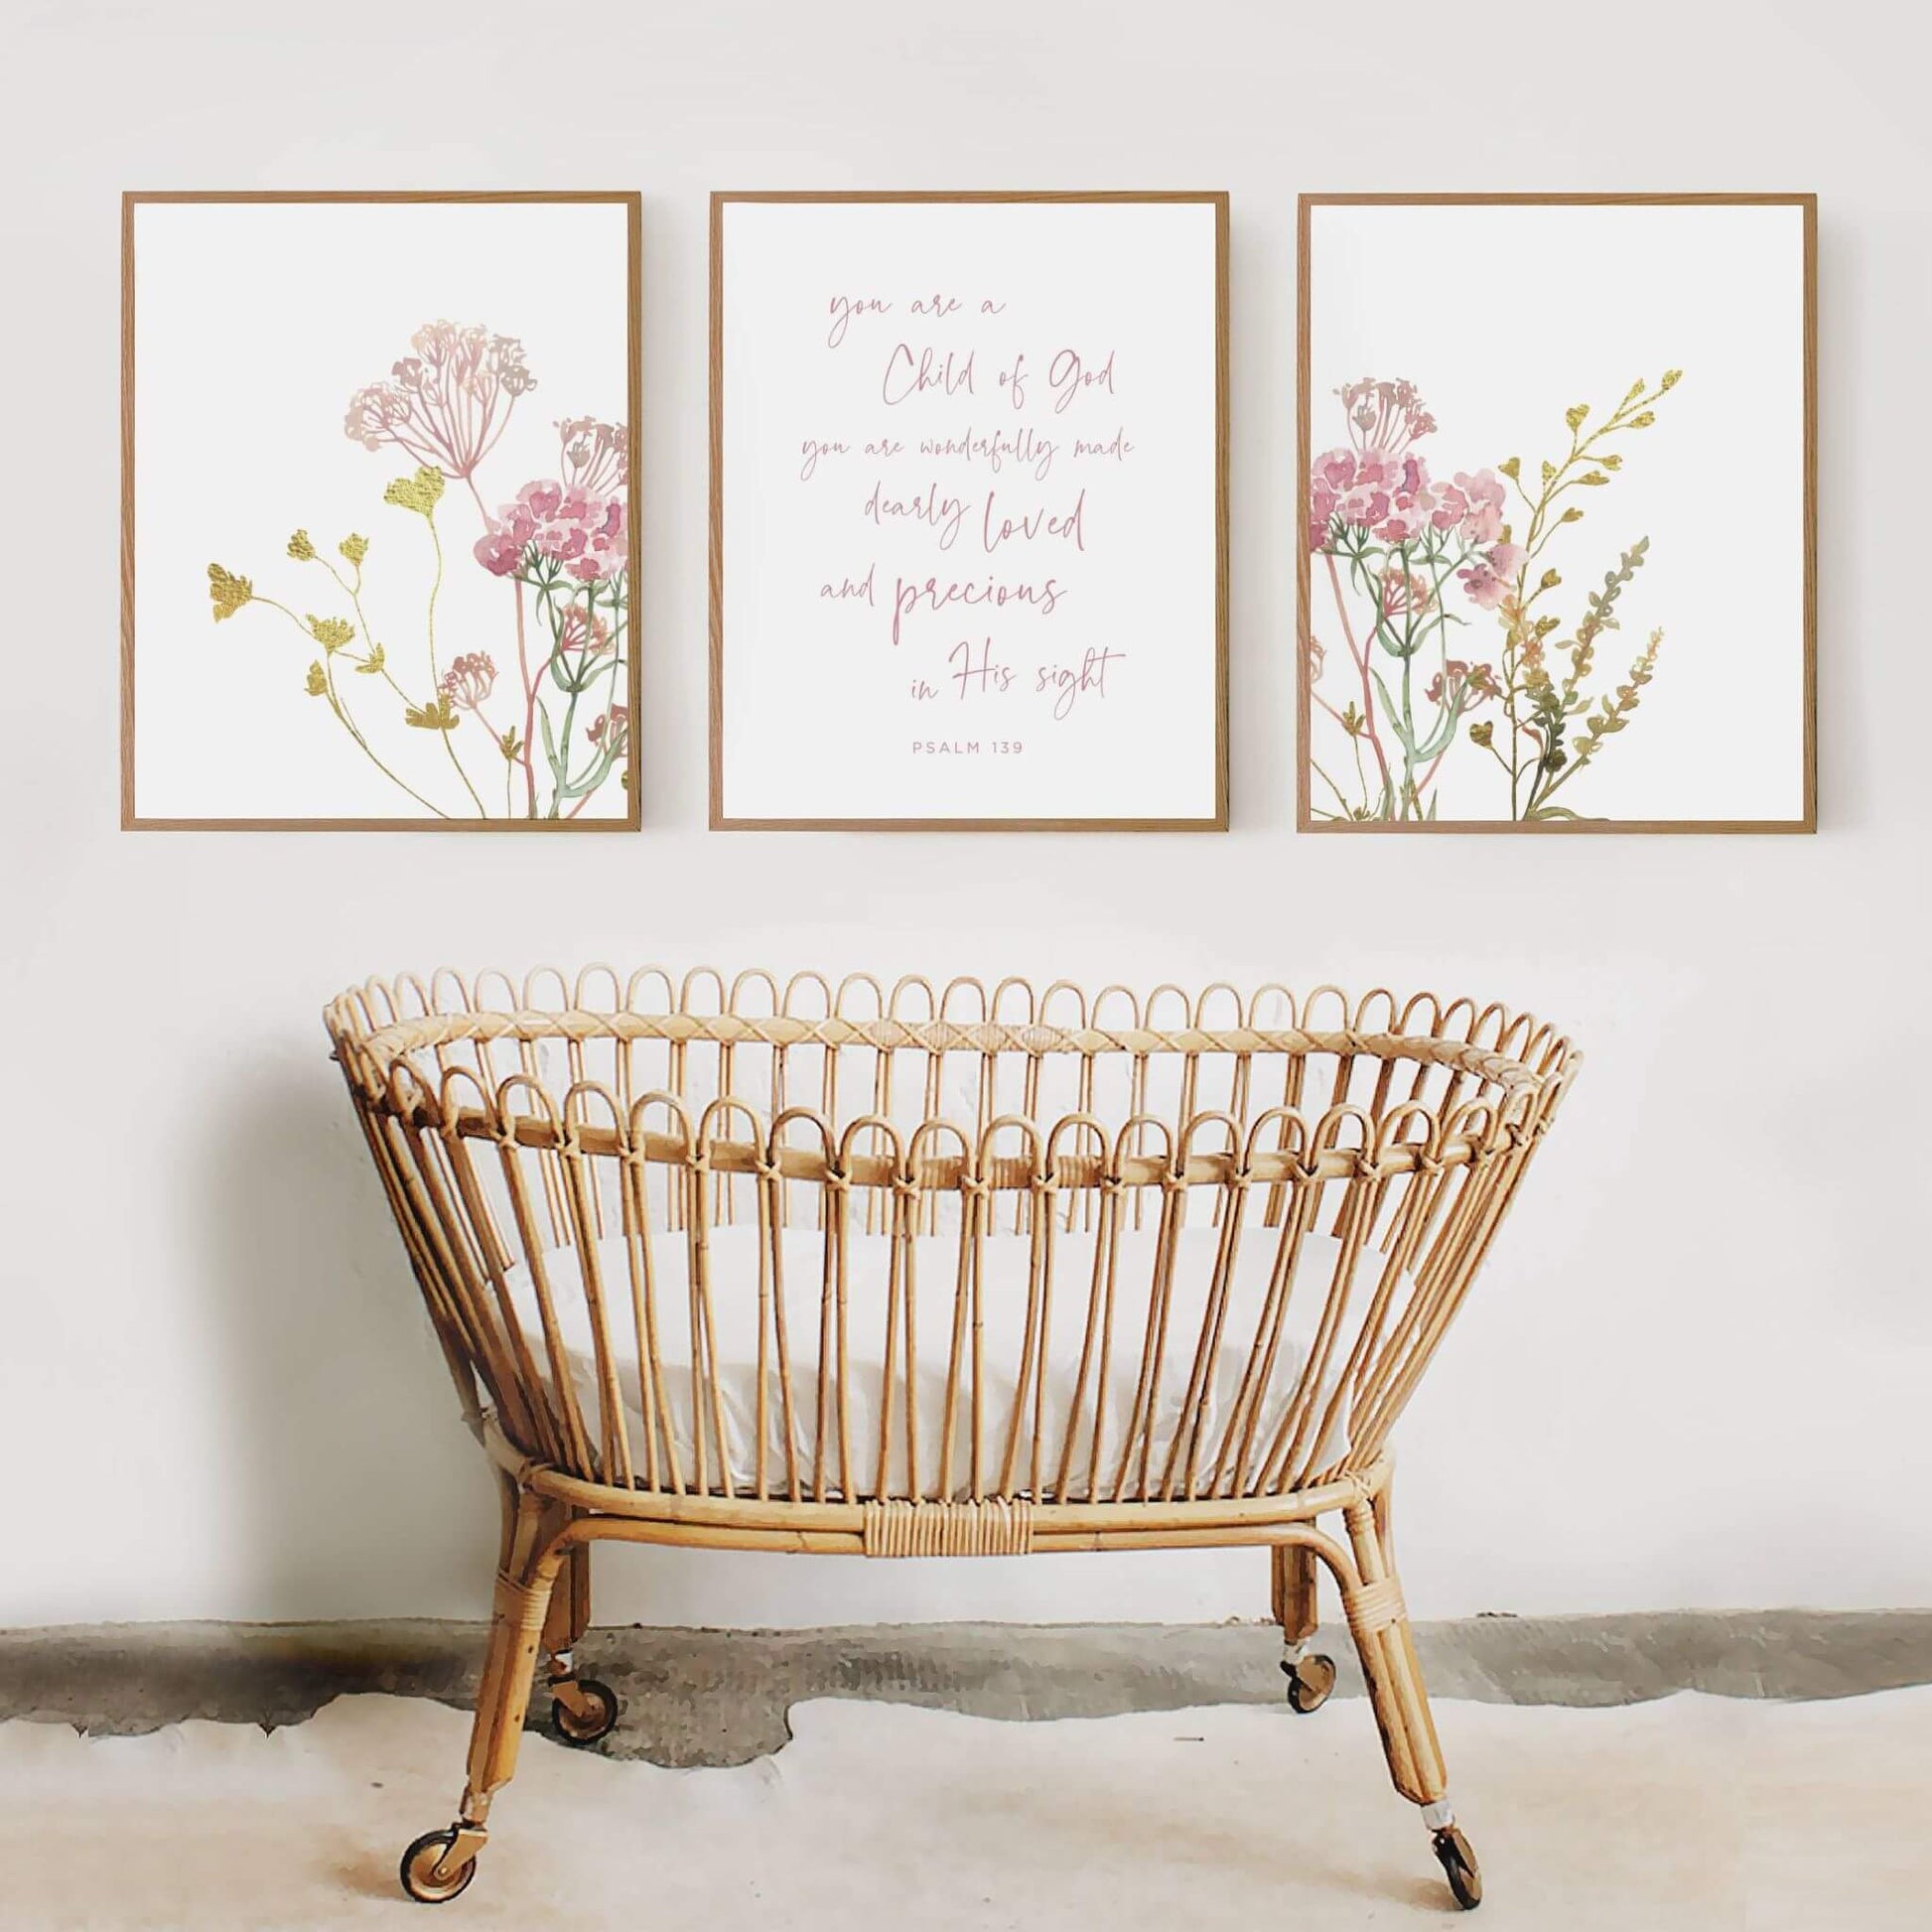 Christian girl nursery wall art set of 3 with pin wildflowers and bible verse